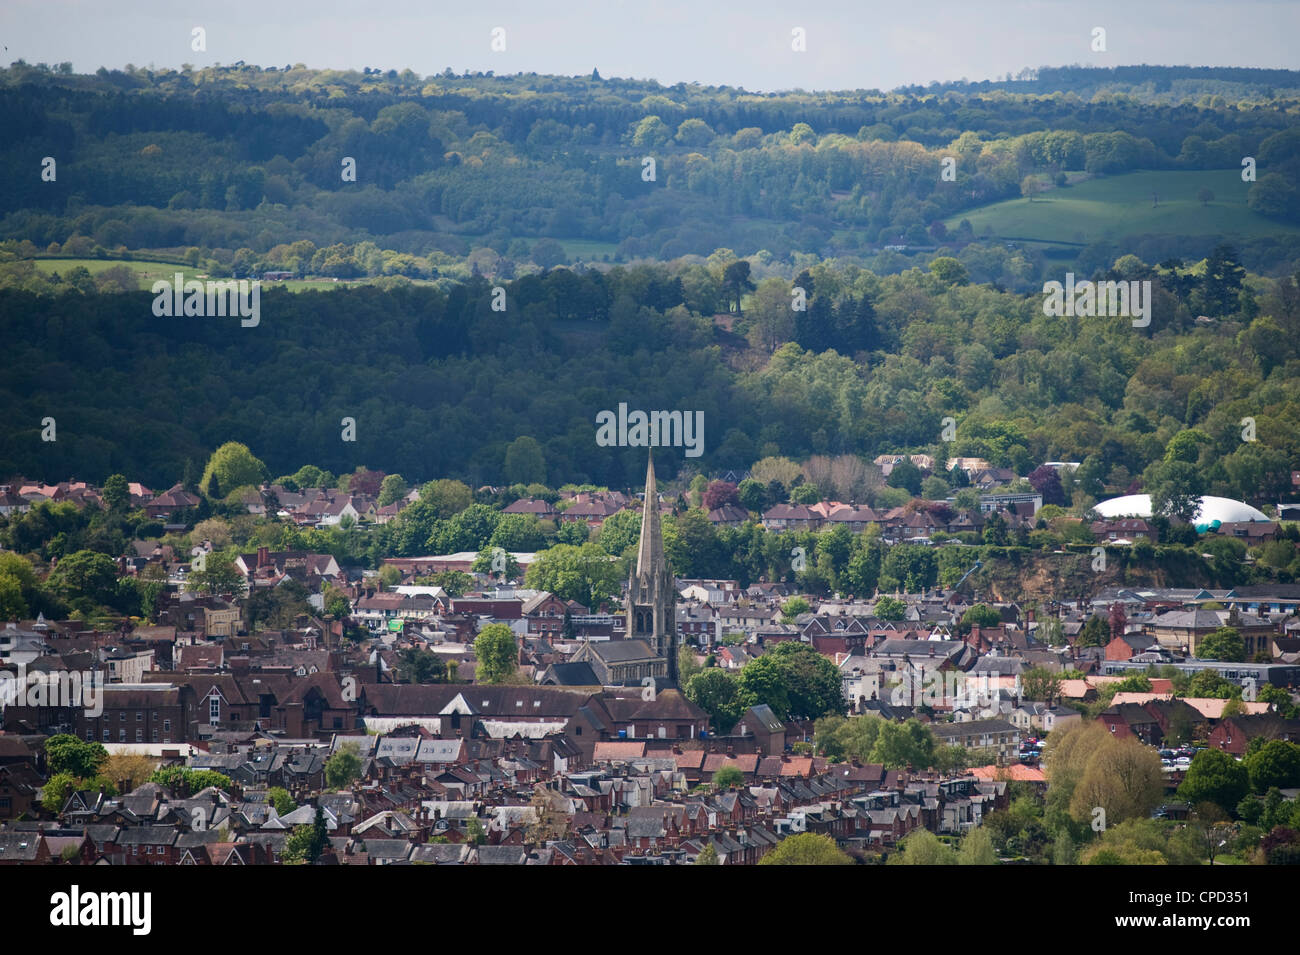 The town of Dorking in Surrey, England, surrounded by the North Downs chalk hills Stock Photo